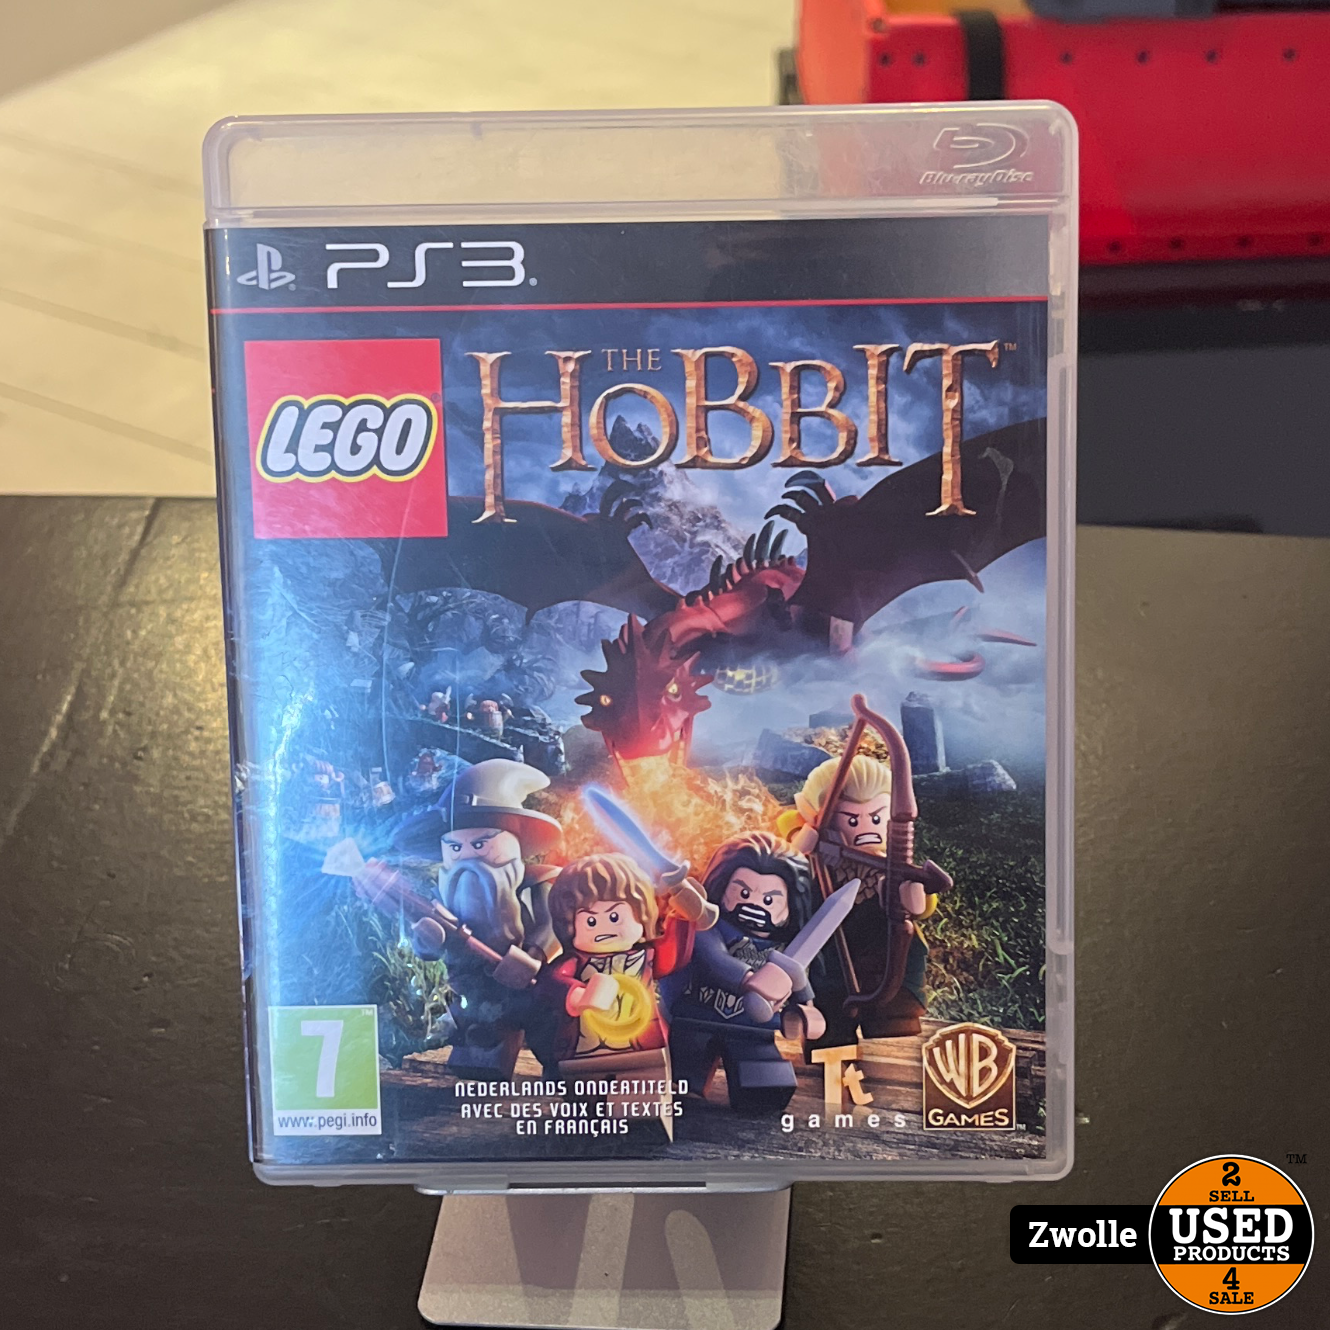 traagheid wimper Uitrusten Playstation 3 game | hobbit - Used Products Zwolle